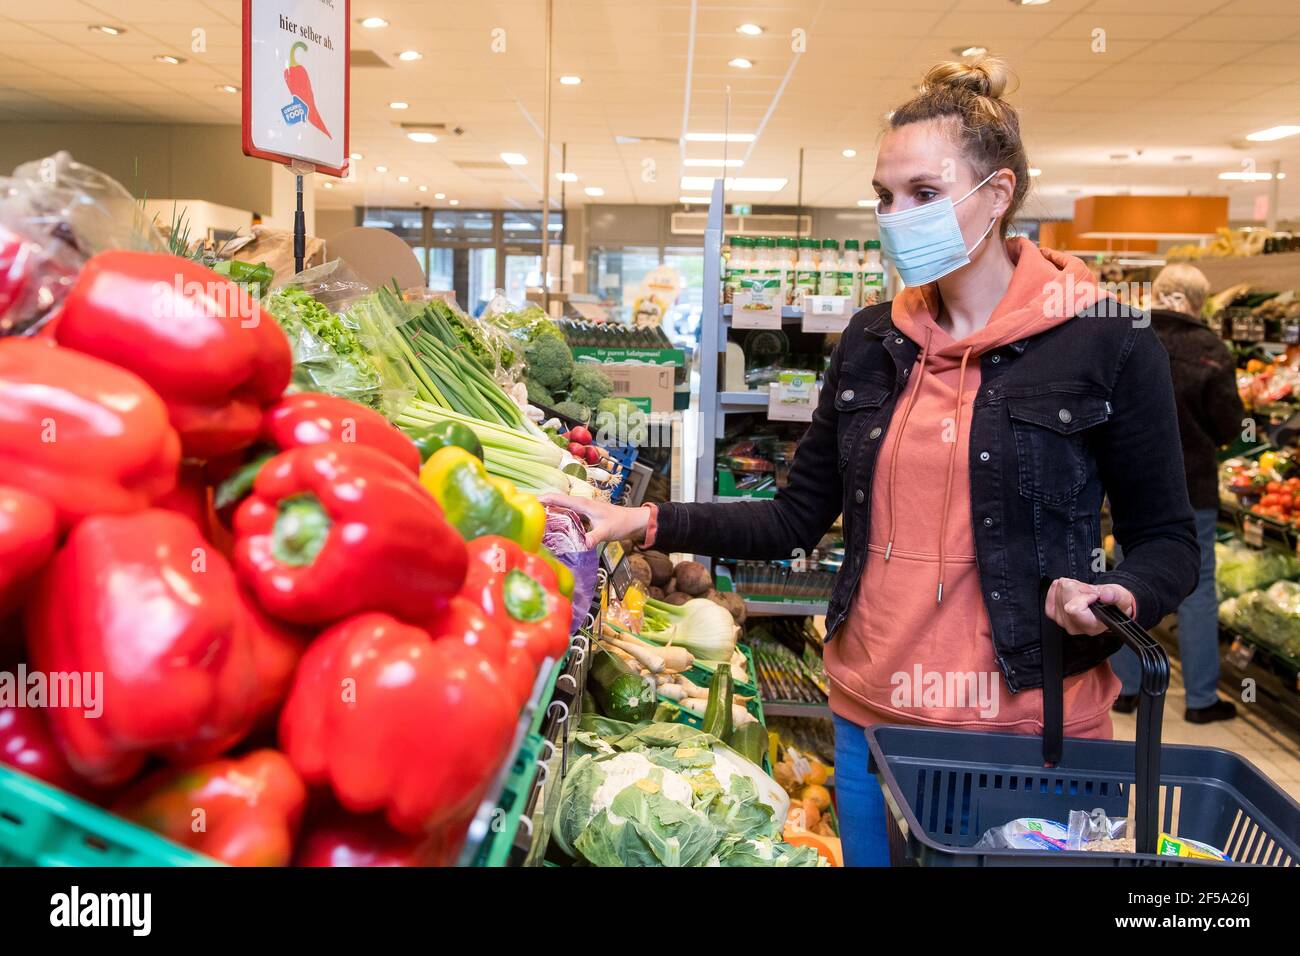 Flensburg, Germany. 29th Apr, 2020. Regarding Verena Maria Schurr's theme service report of March 25, 2021: If you don't want to spend the Easter holidays in a shopping frenzy, it's best to plan your errands and meals properly beforehand. Credit: Benjamin Nolte/dpa-tmn/dpa/Alamy Live News Stock Photo